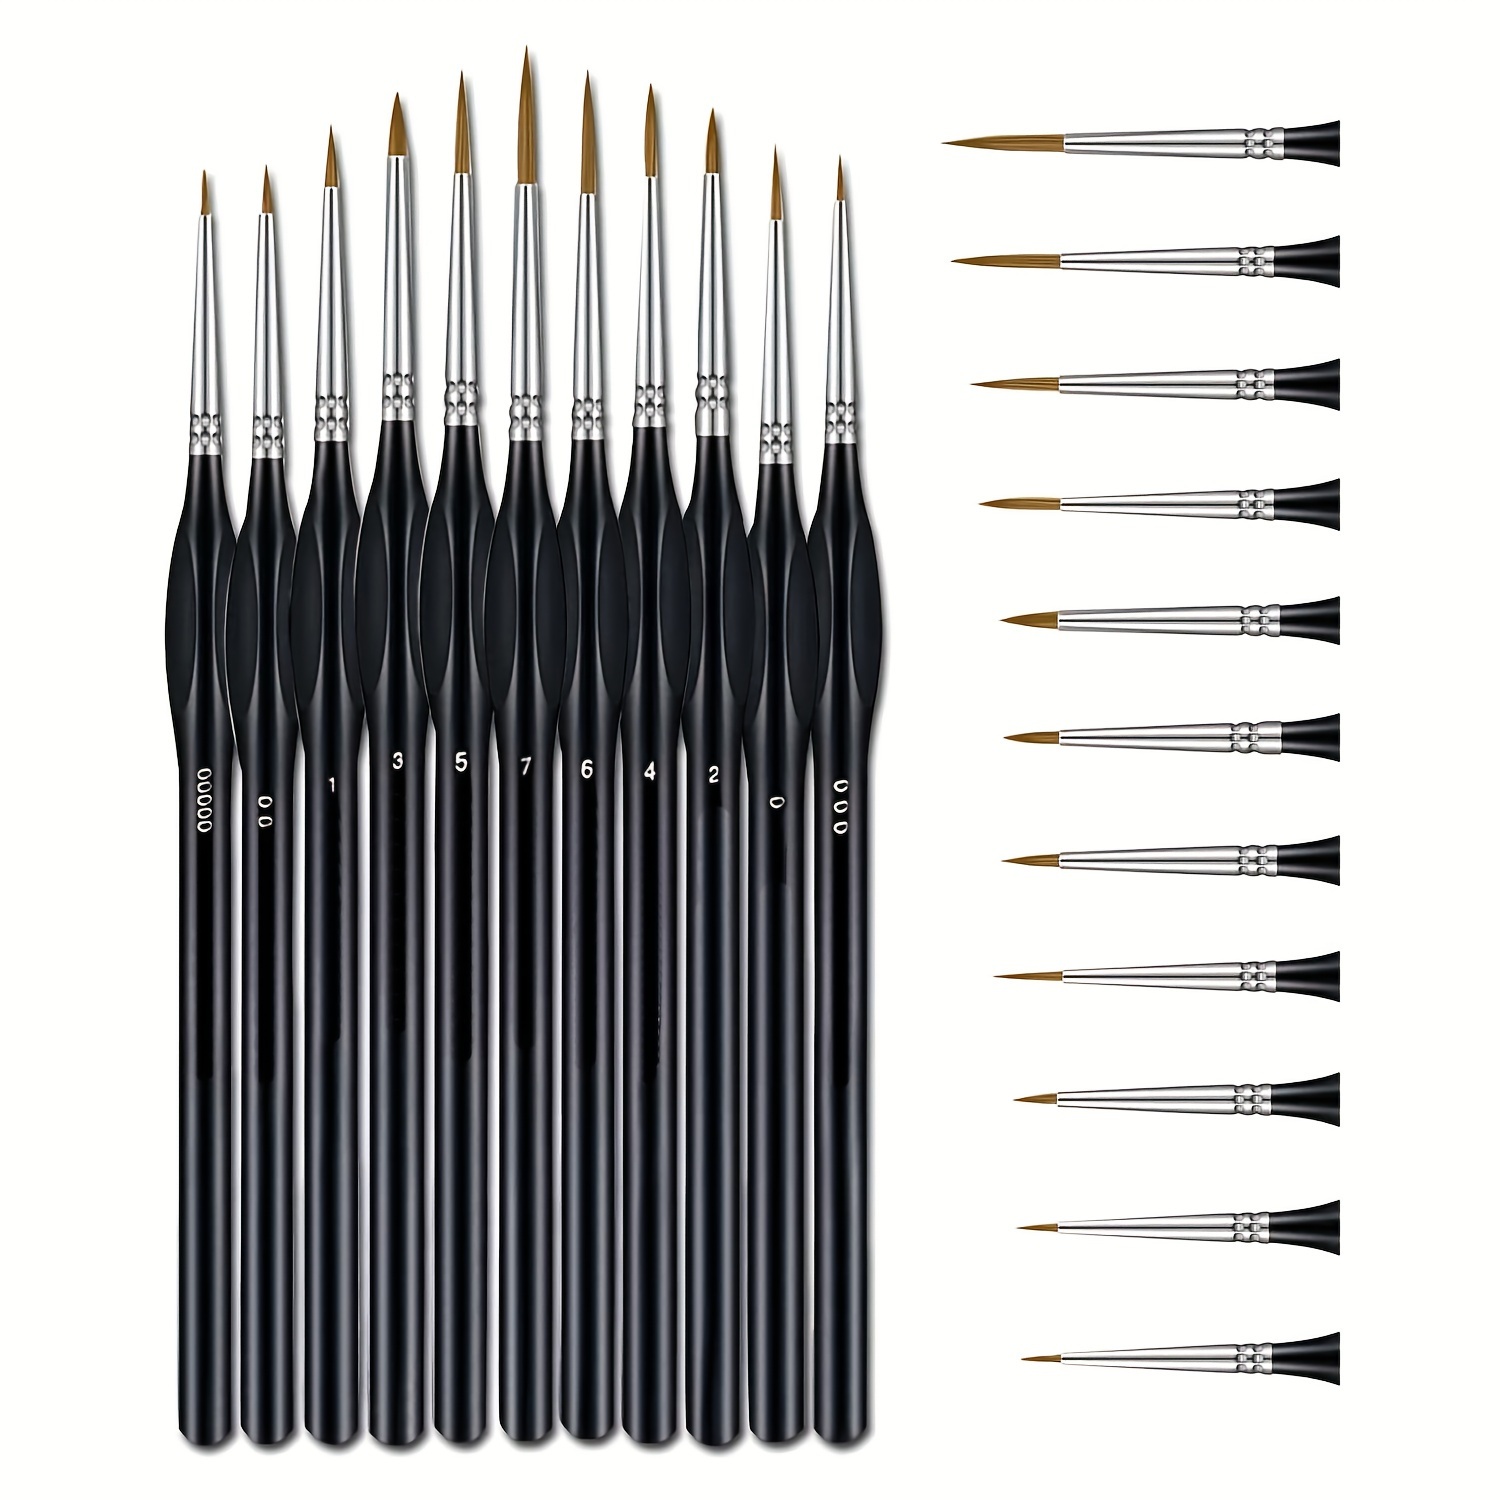 Fine Detail Paint Brush Set - 7 Pieces Miniature Brushes for Watercolor,  Acrylic Painting, Models, Airplane Kits